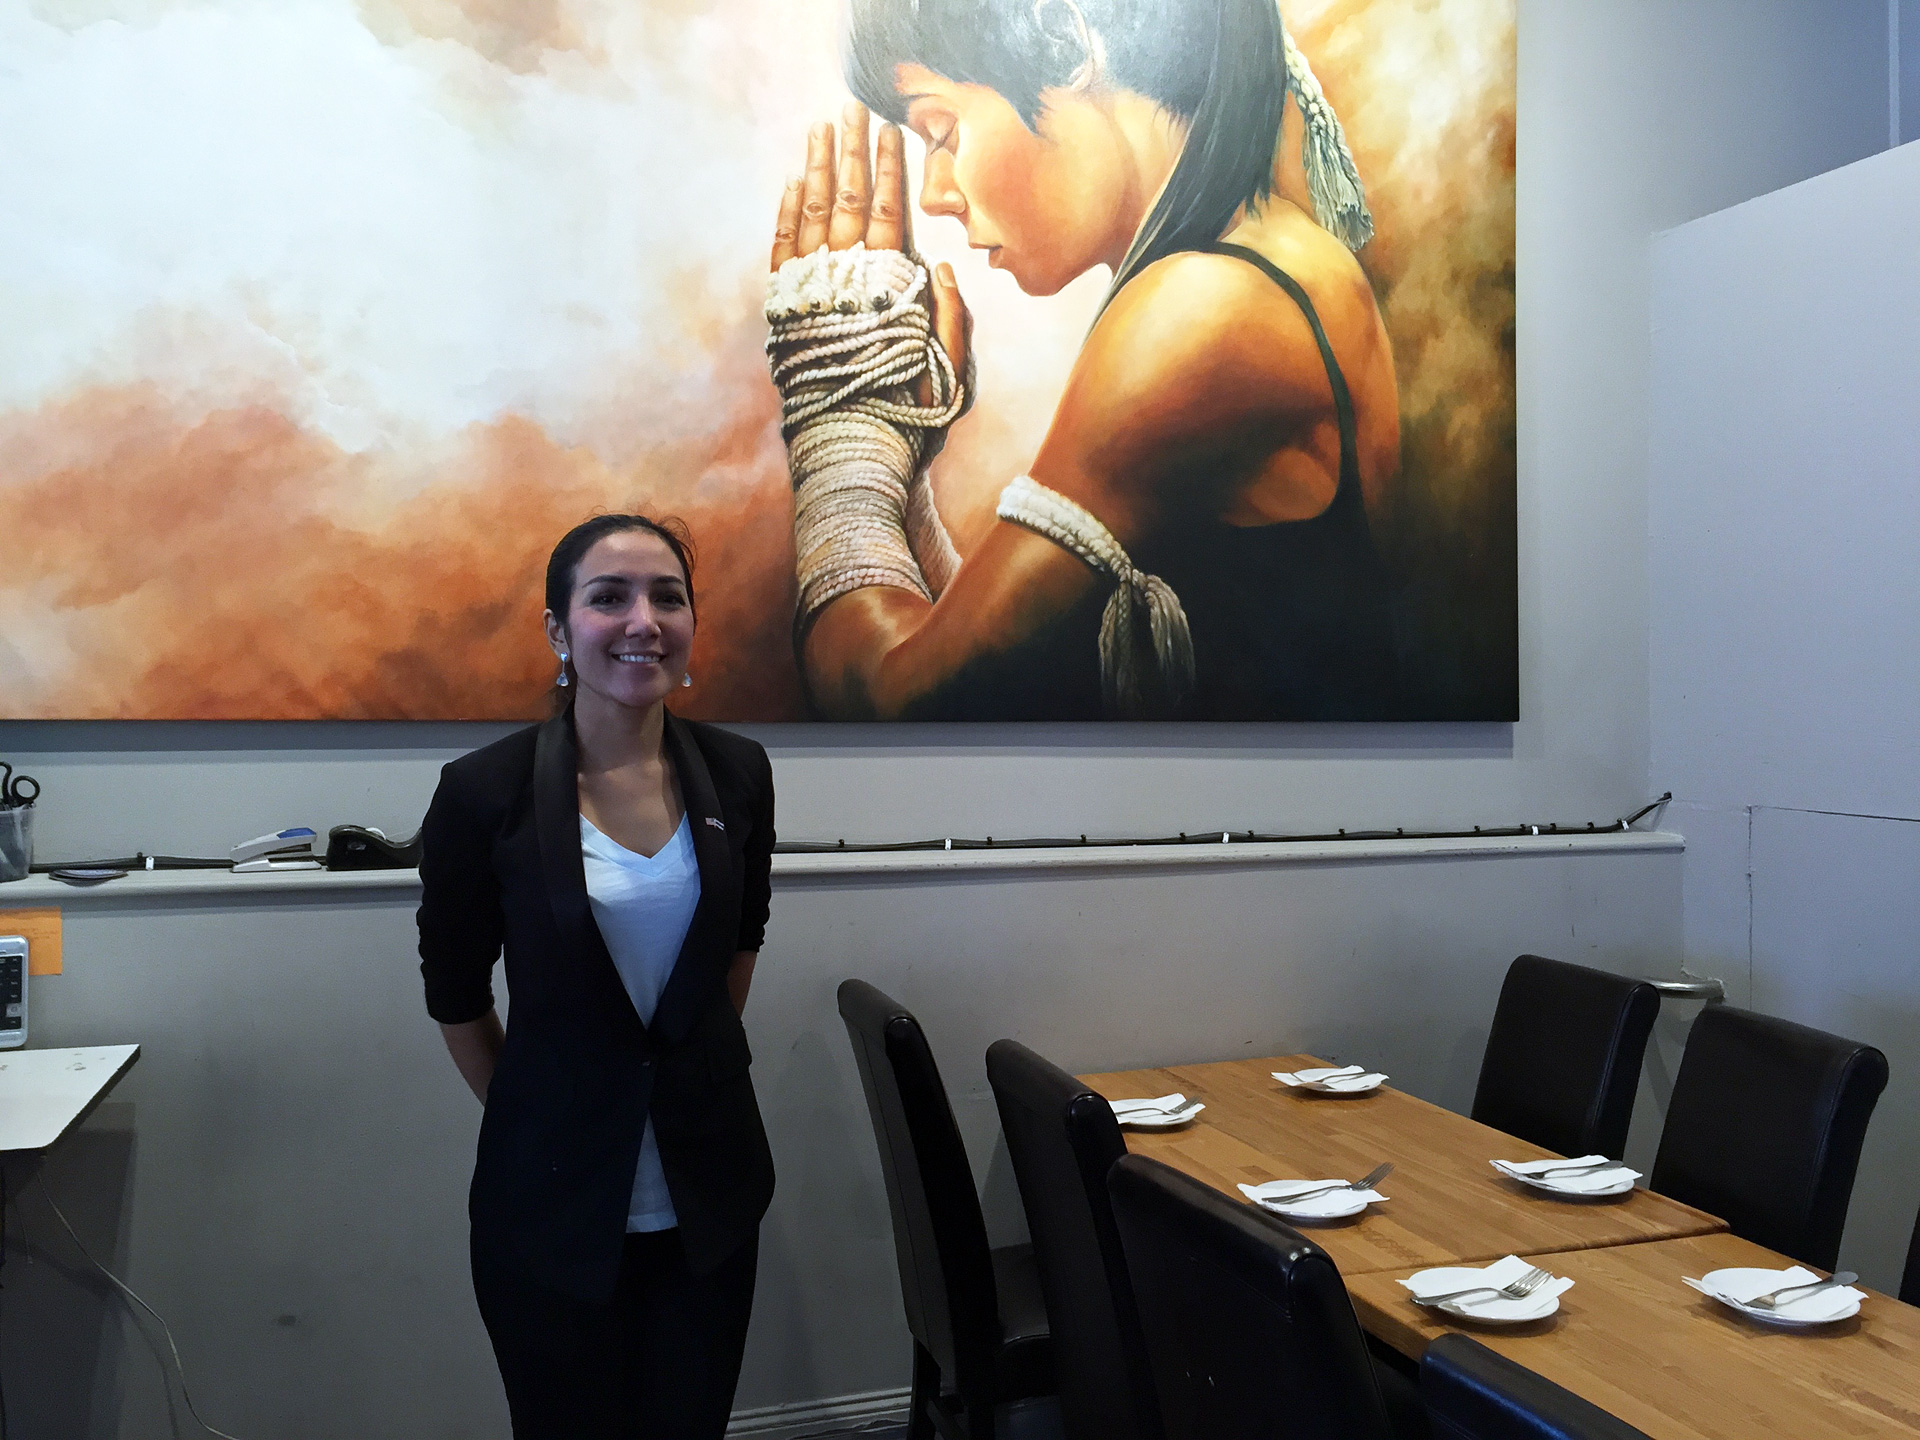 Chef-owner Salisa Skinner with one of her sister Air’s large oil paintings.